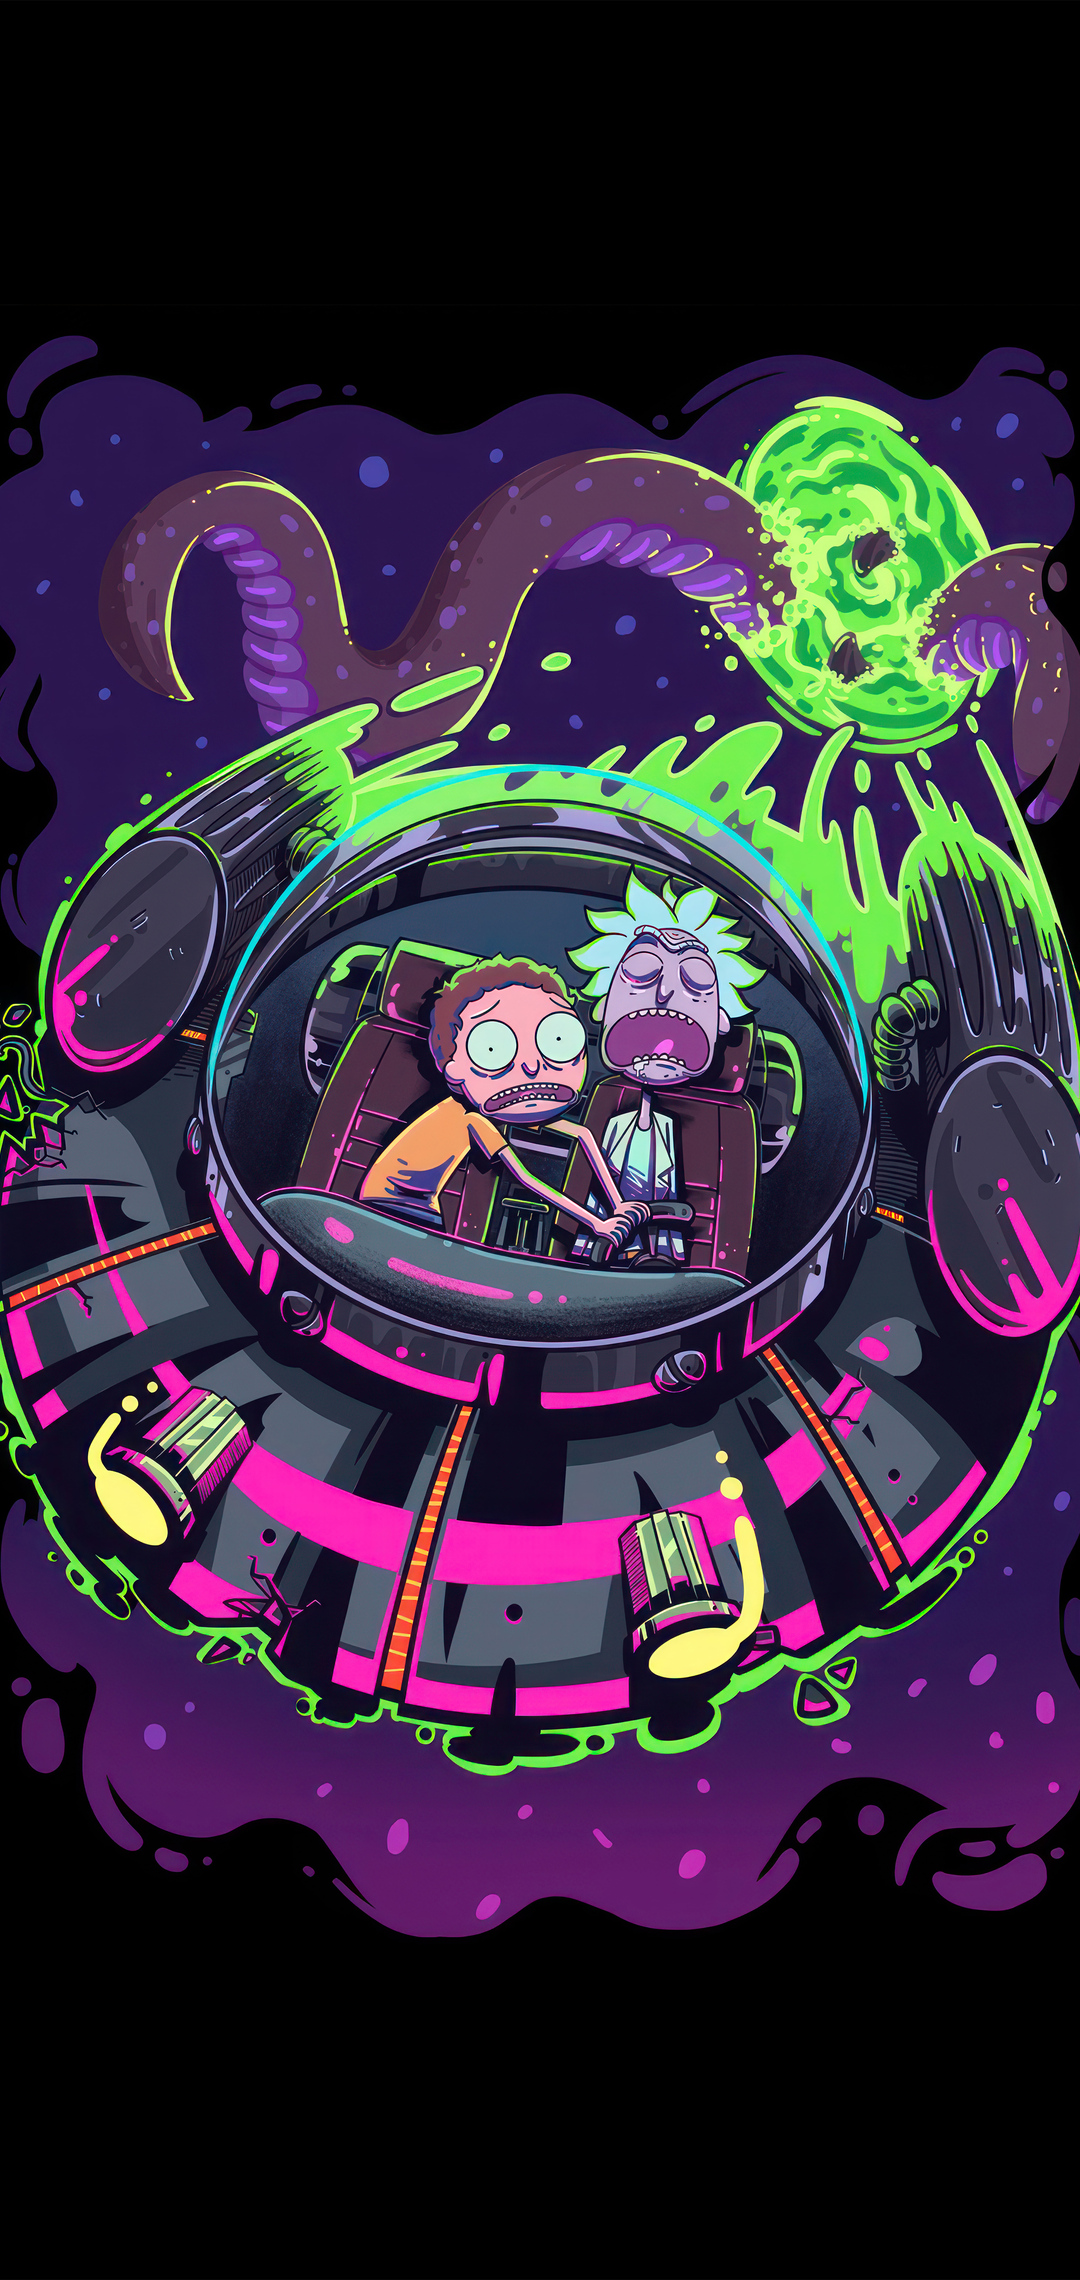 rick-and-morty-out-of-control-4k-ak.jpg